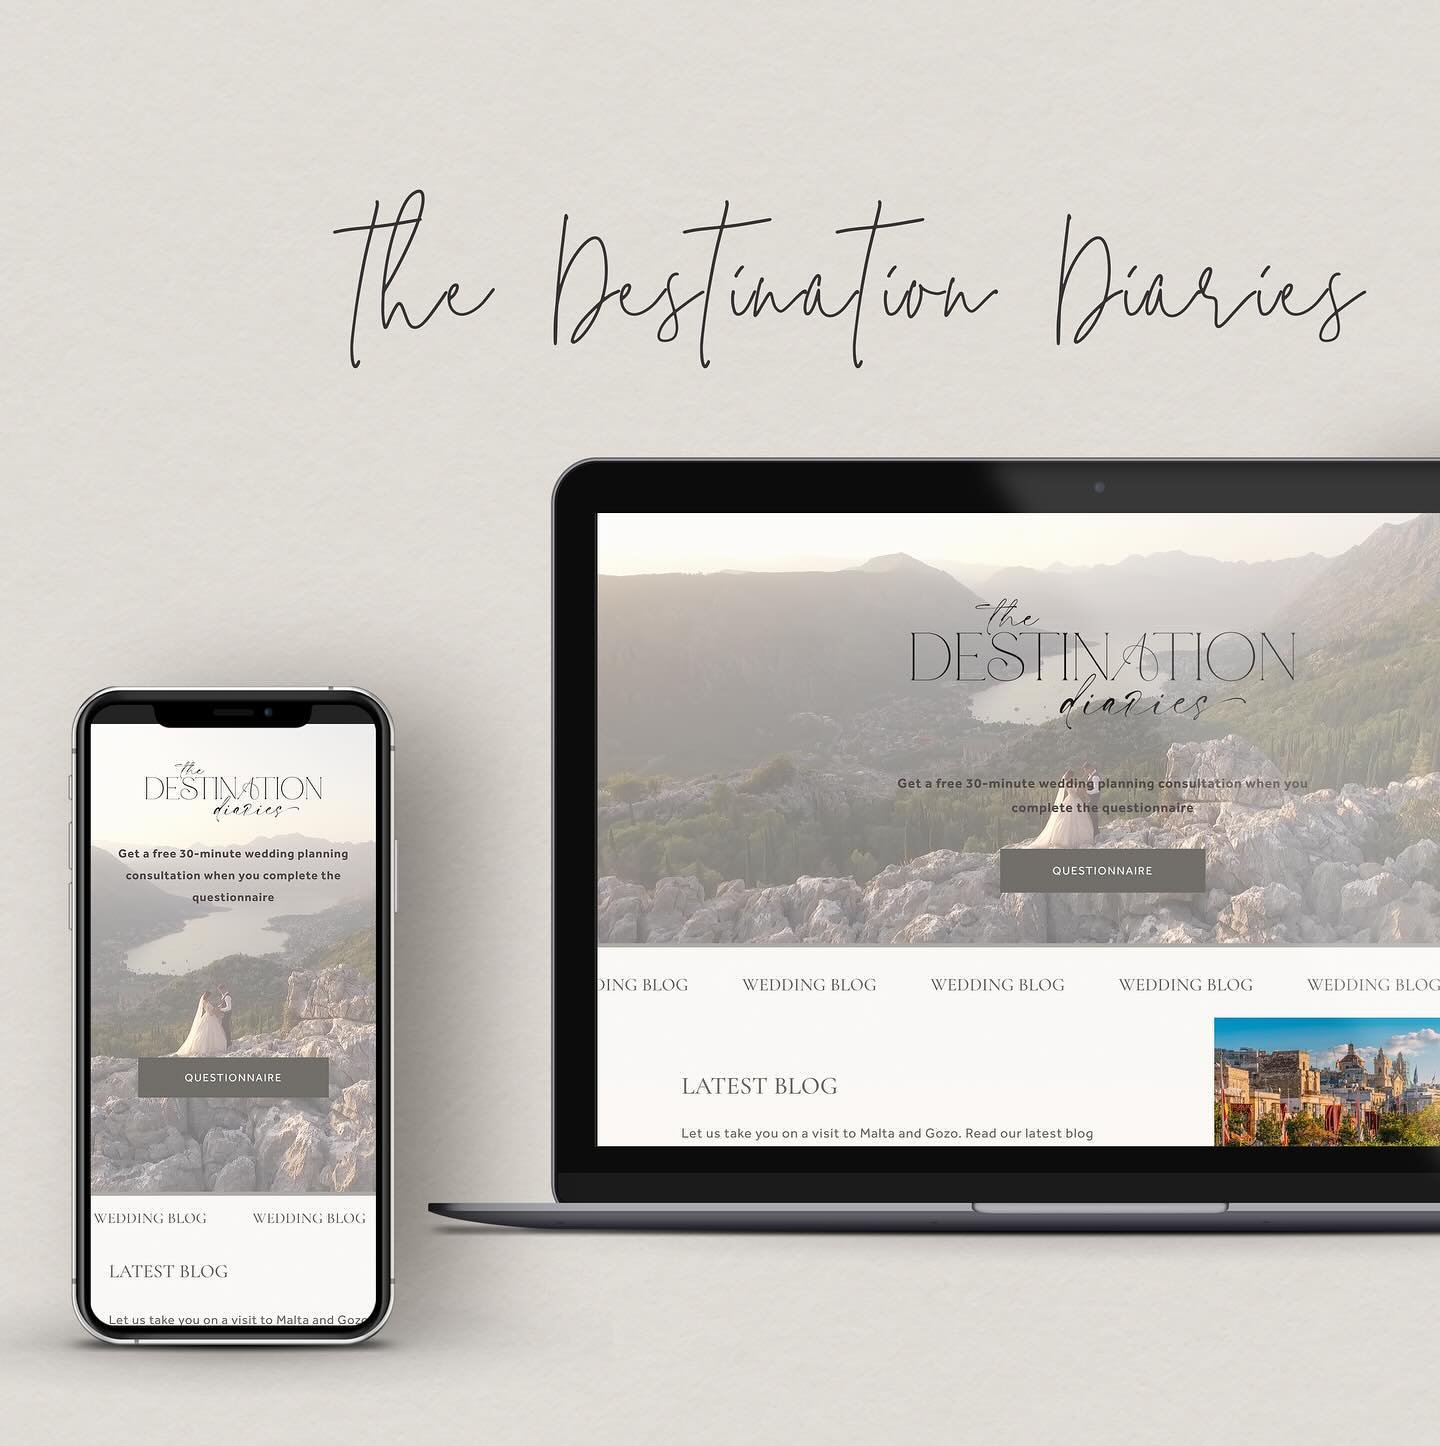 A new website for the lovely @thedestination_diaries 

This is phase one of an exciting website for @thedestination_diaries that we are working behind the scenes on. At the moment the wonderful Martina is sharing with you her destination wedding blog